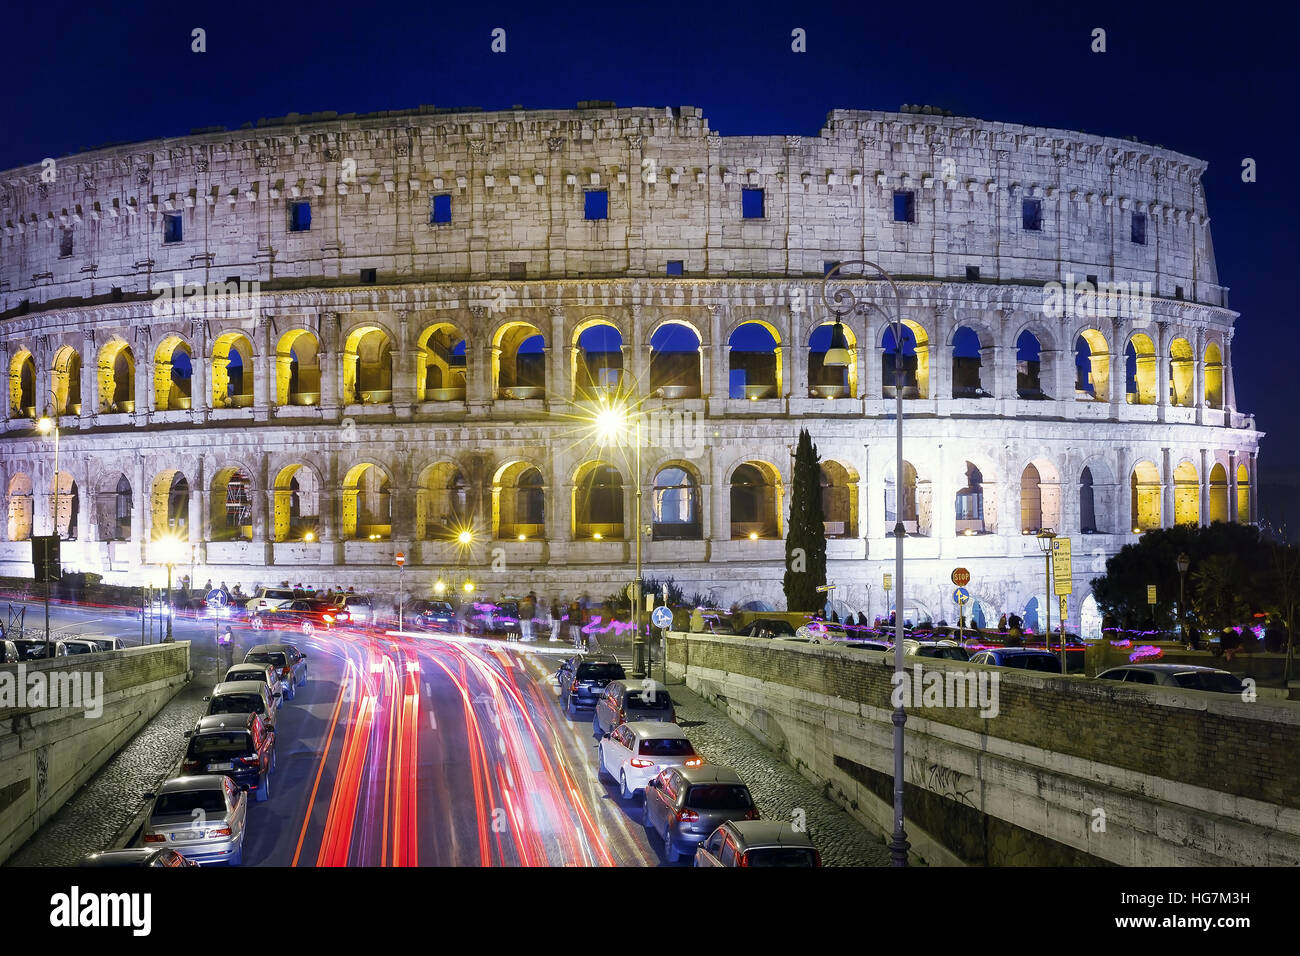 Long exposure to the Colosseum, taken at night with the shining path of cars. Front view of the Colosseum facade. Stock Photo